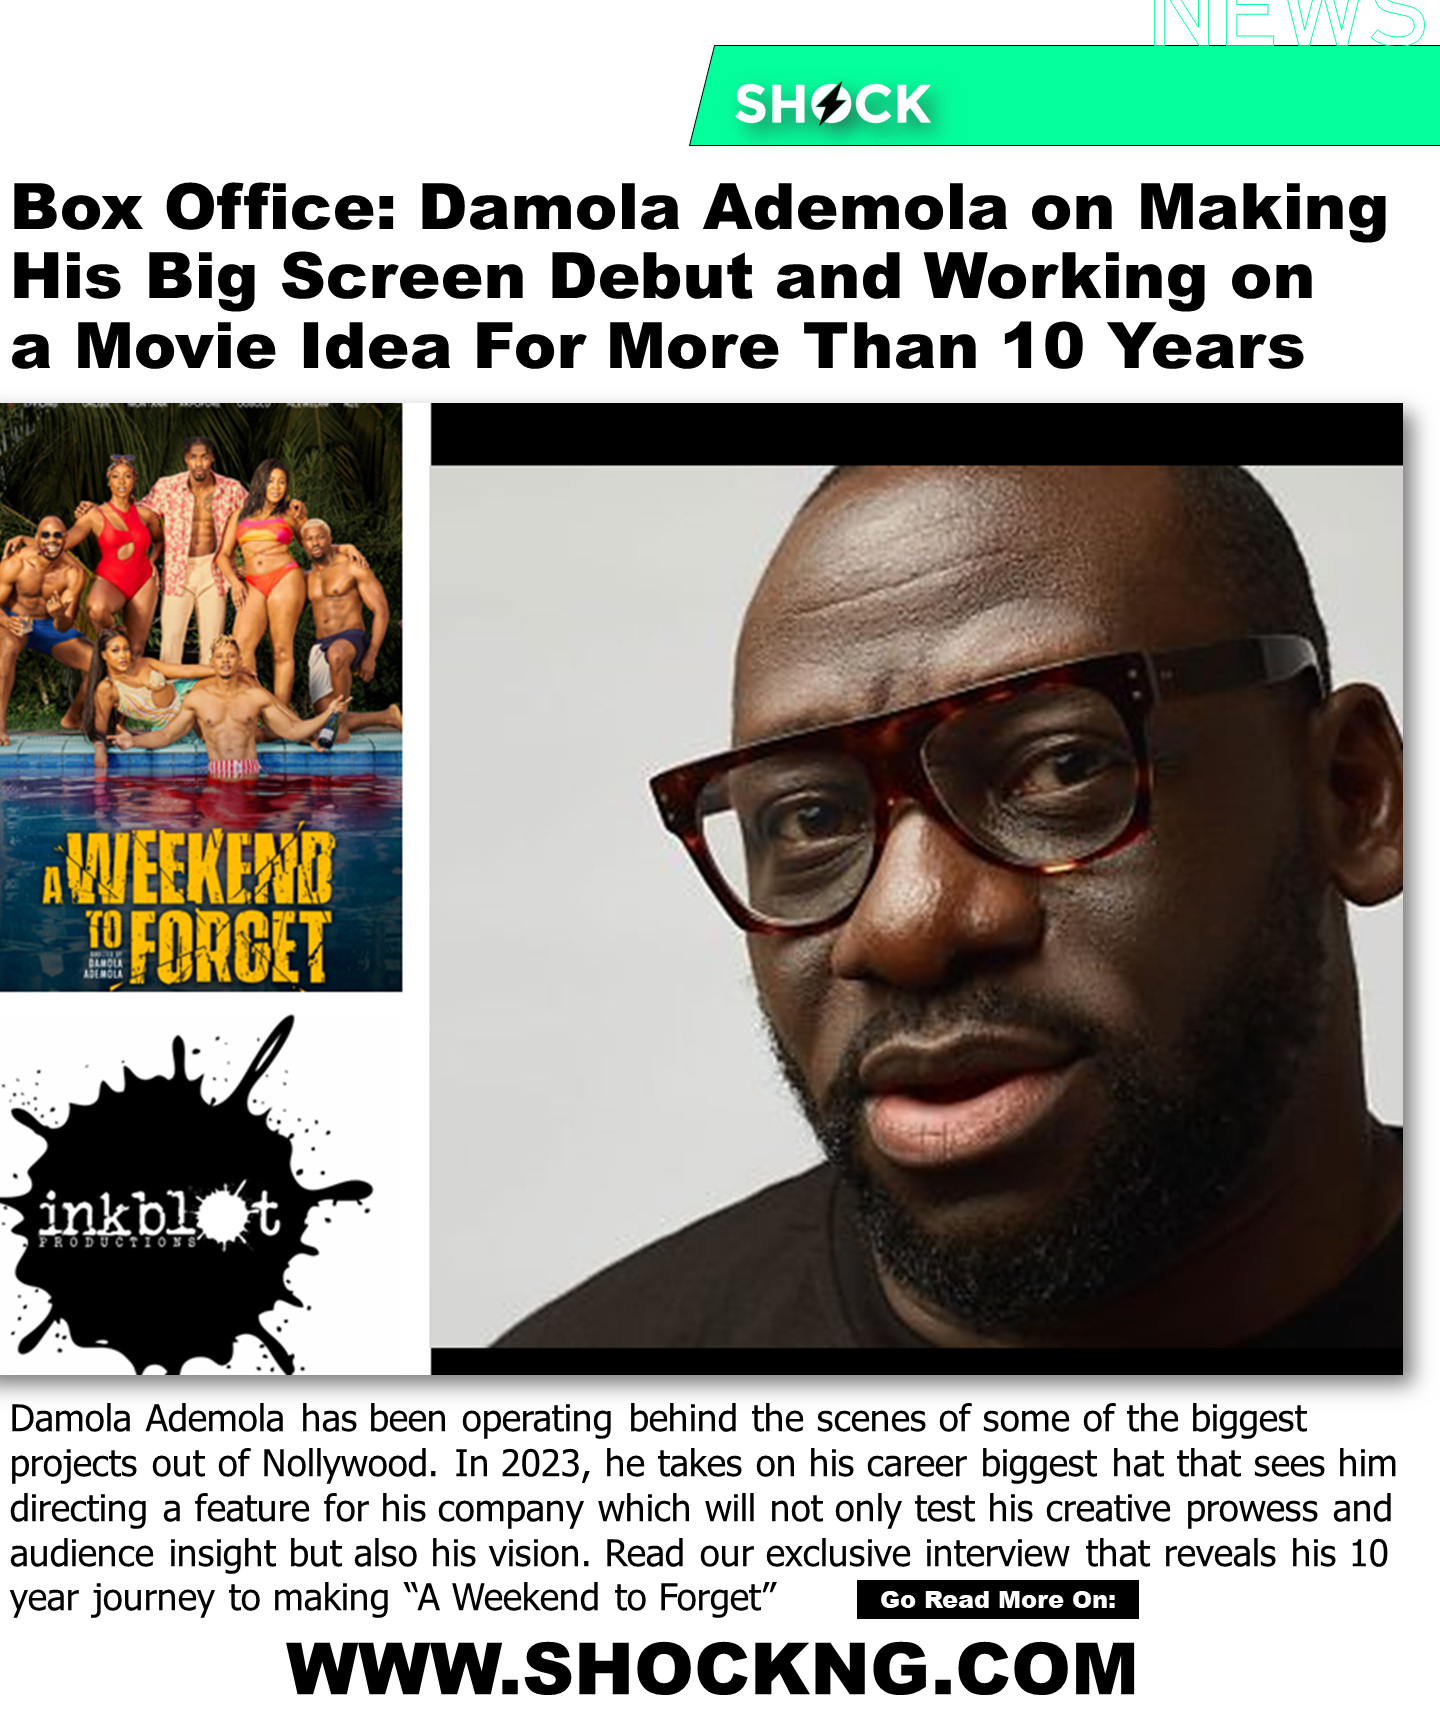 A weekend to forget director - Damola Ademola on Making His Big Screen Debut and Working on A Movie Idea for More Than 10 Years